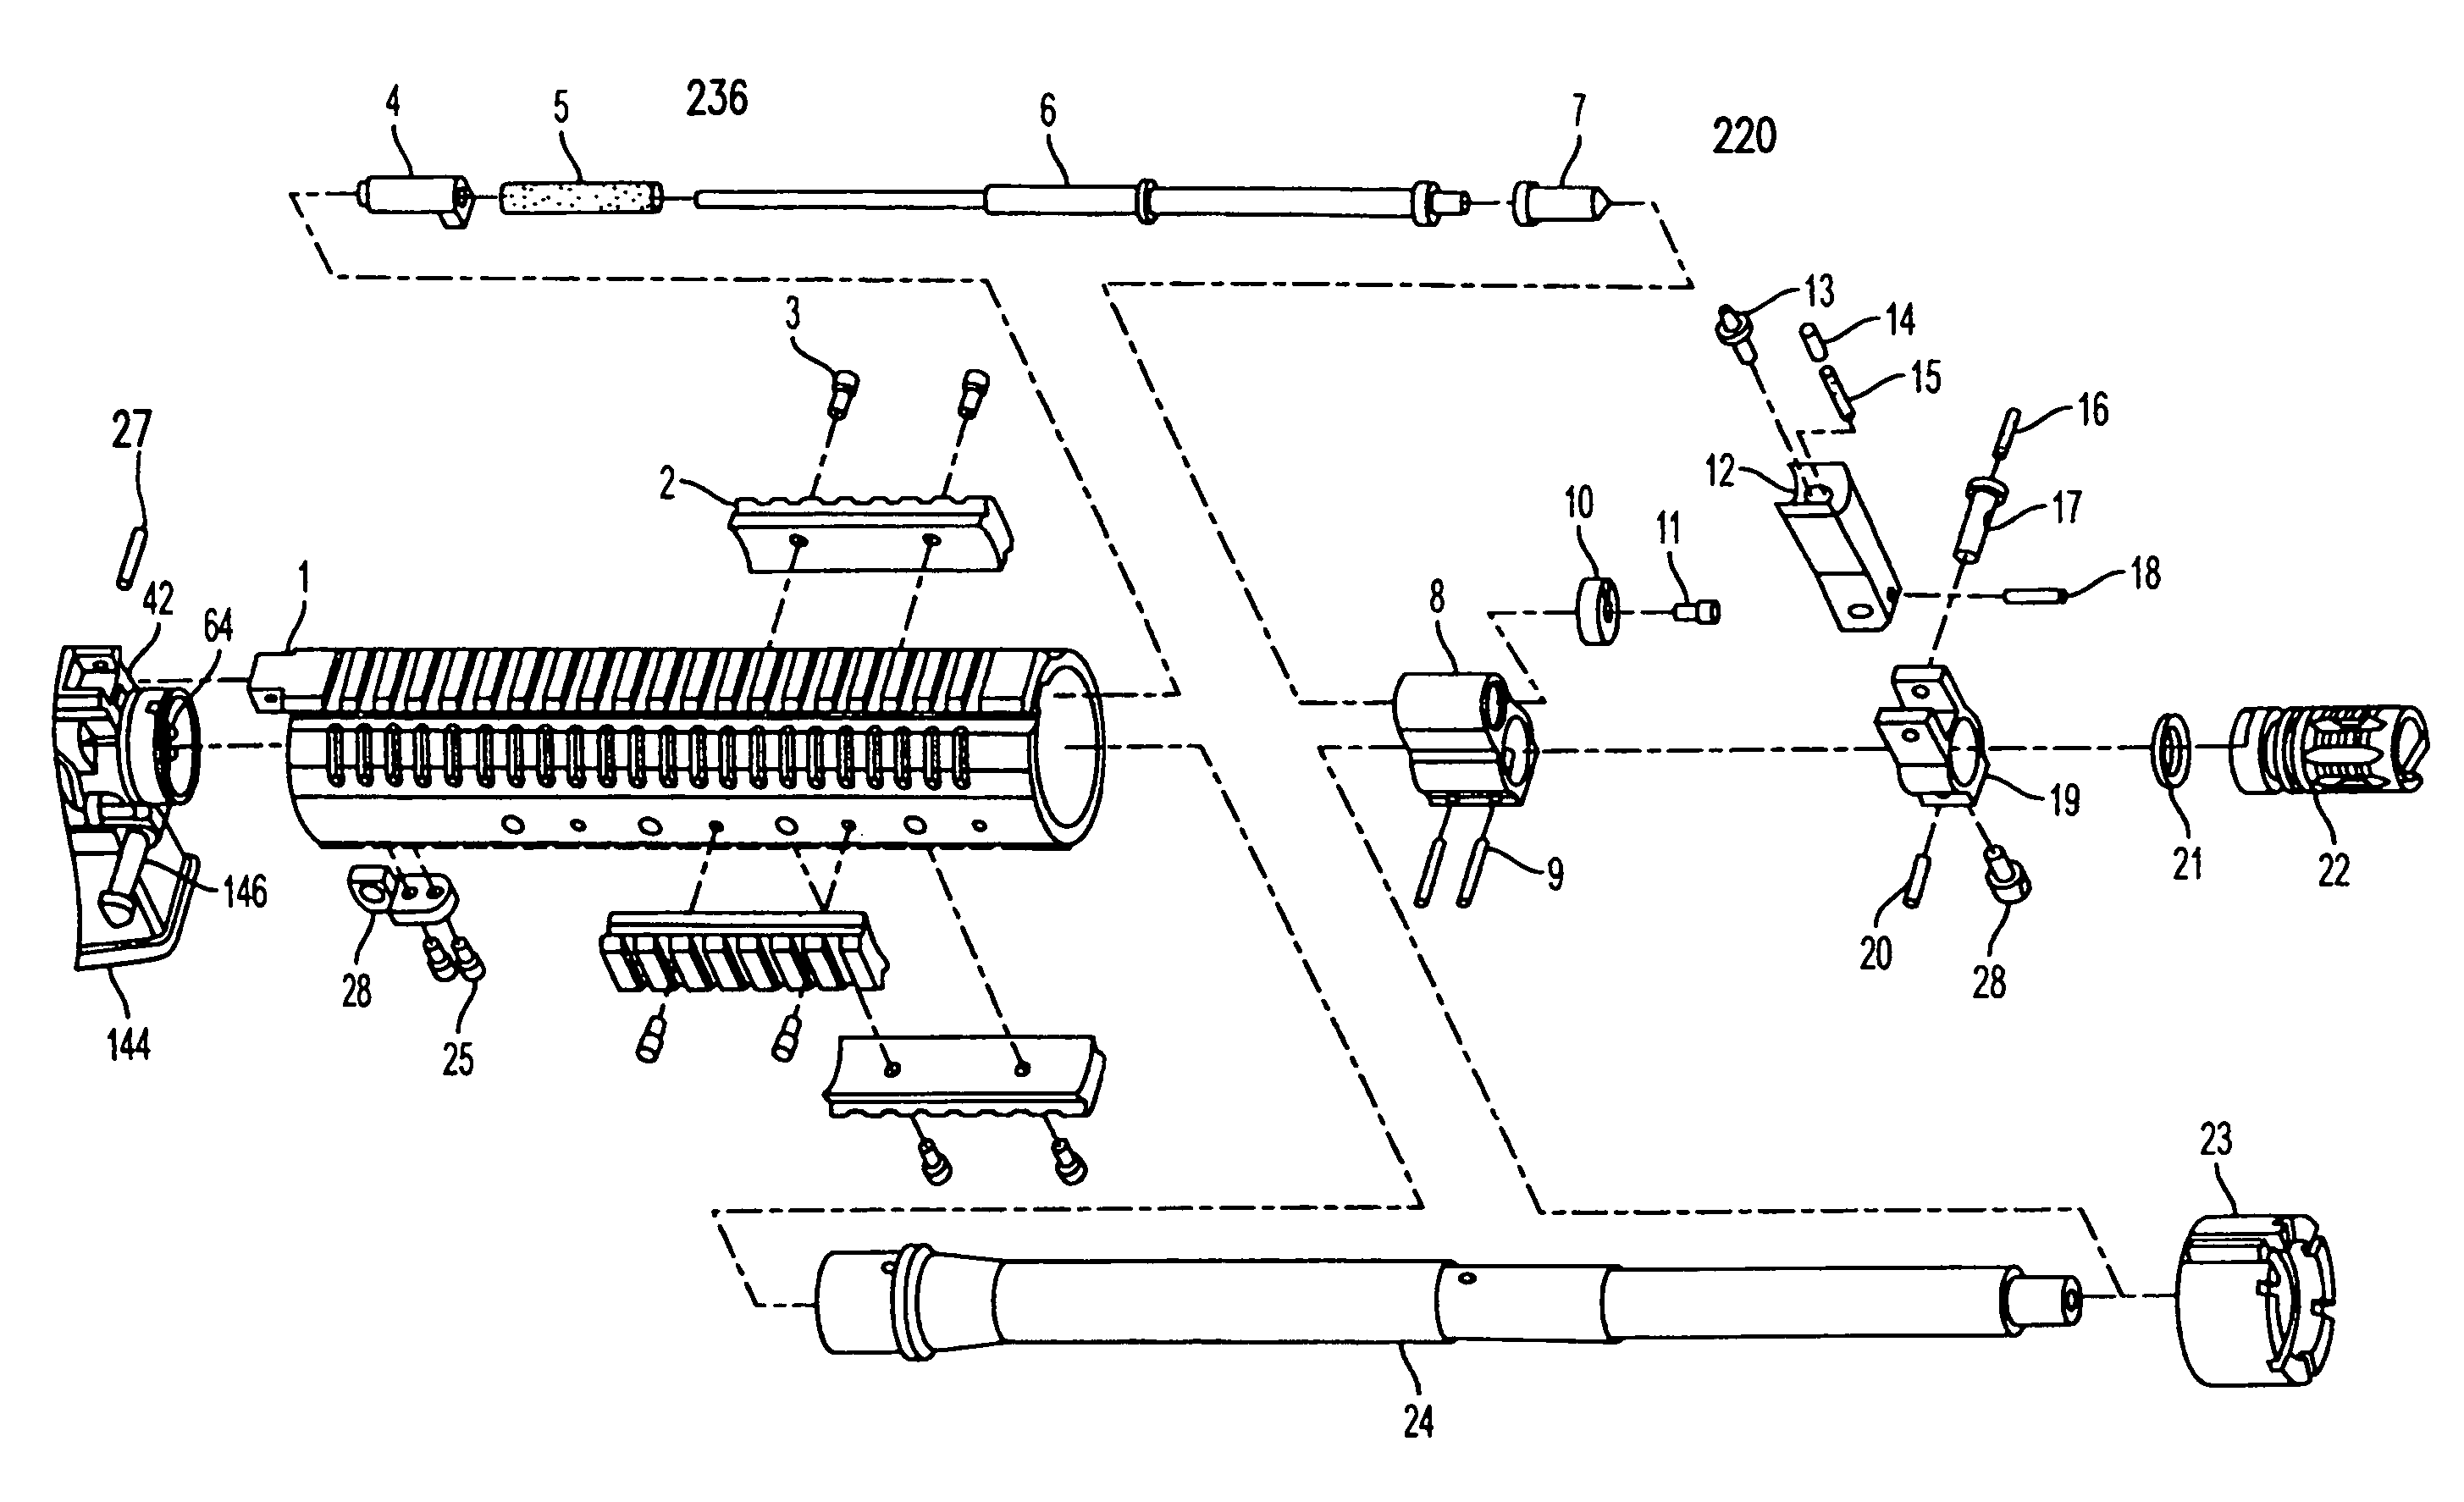 Firearm having an indirect gas operating system